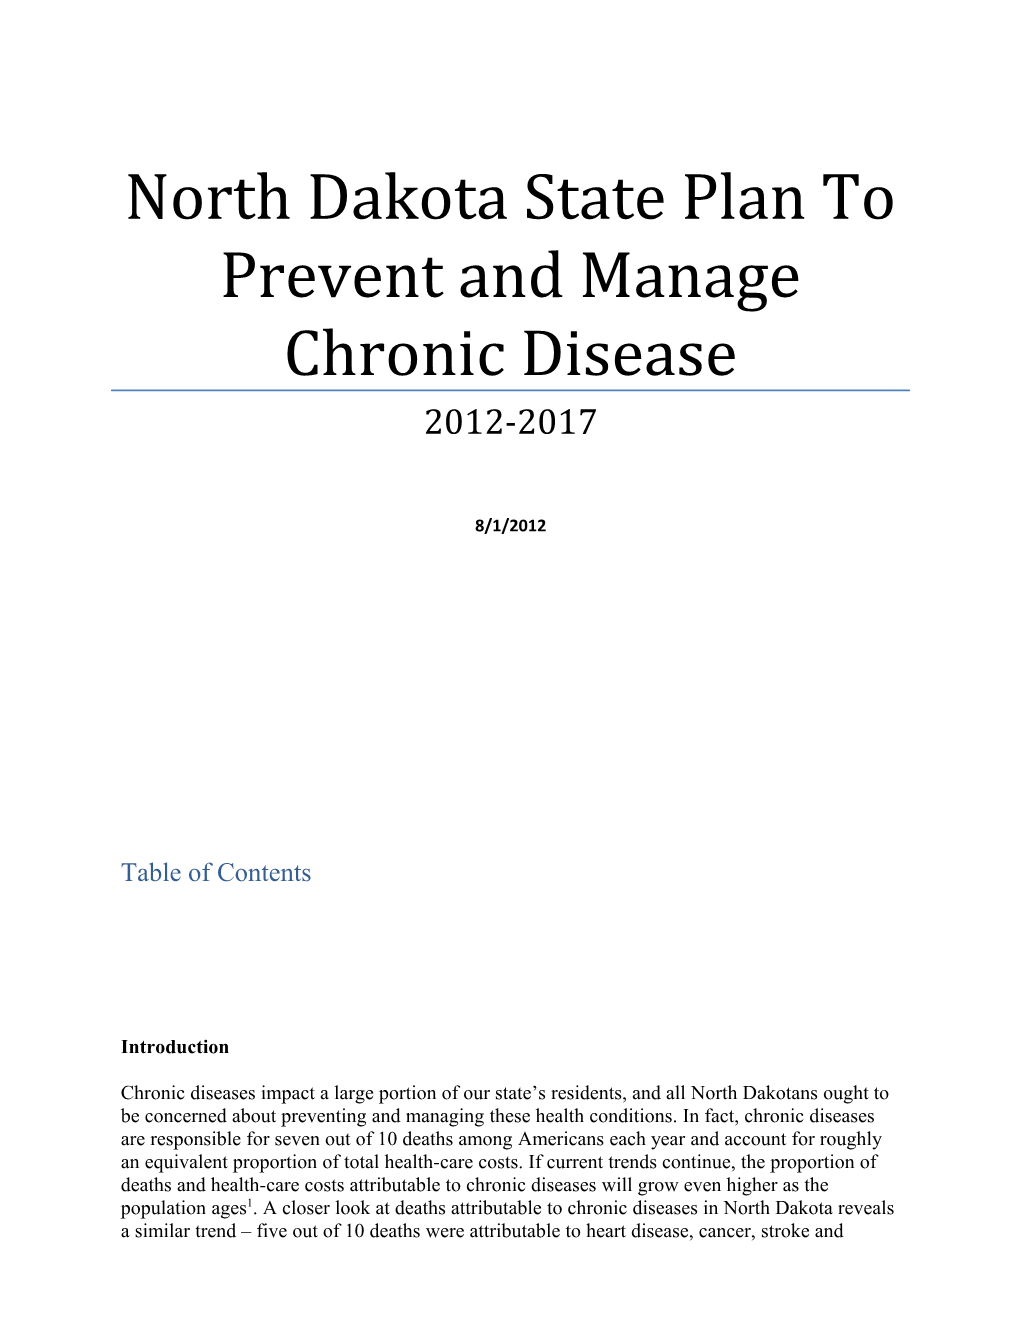 North Dakota State Plan to Prevent and Manage Chronic Disease